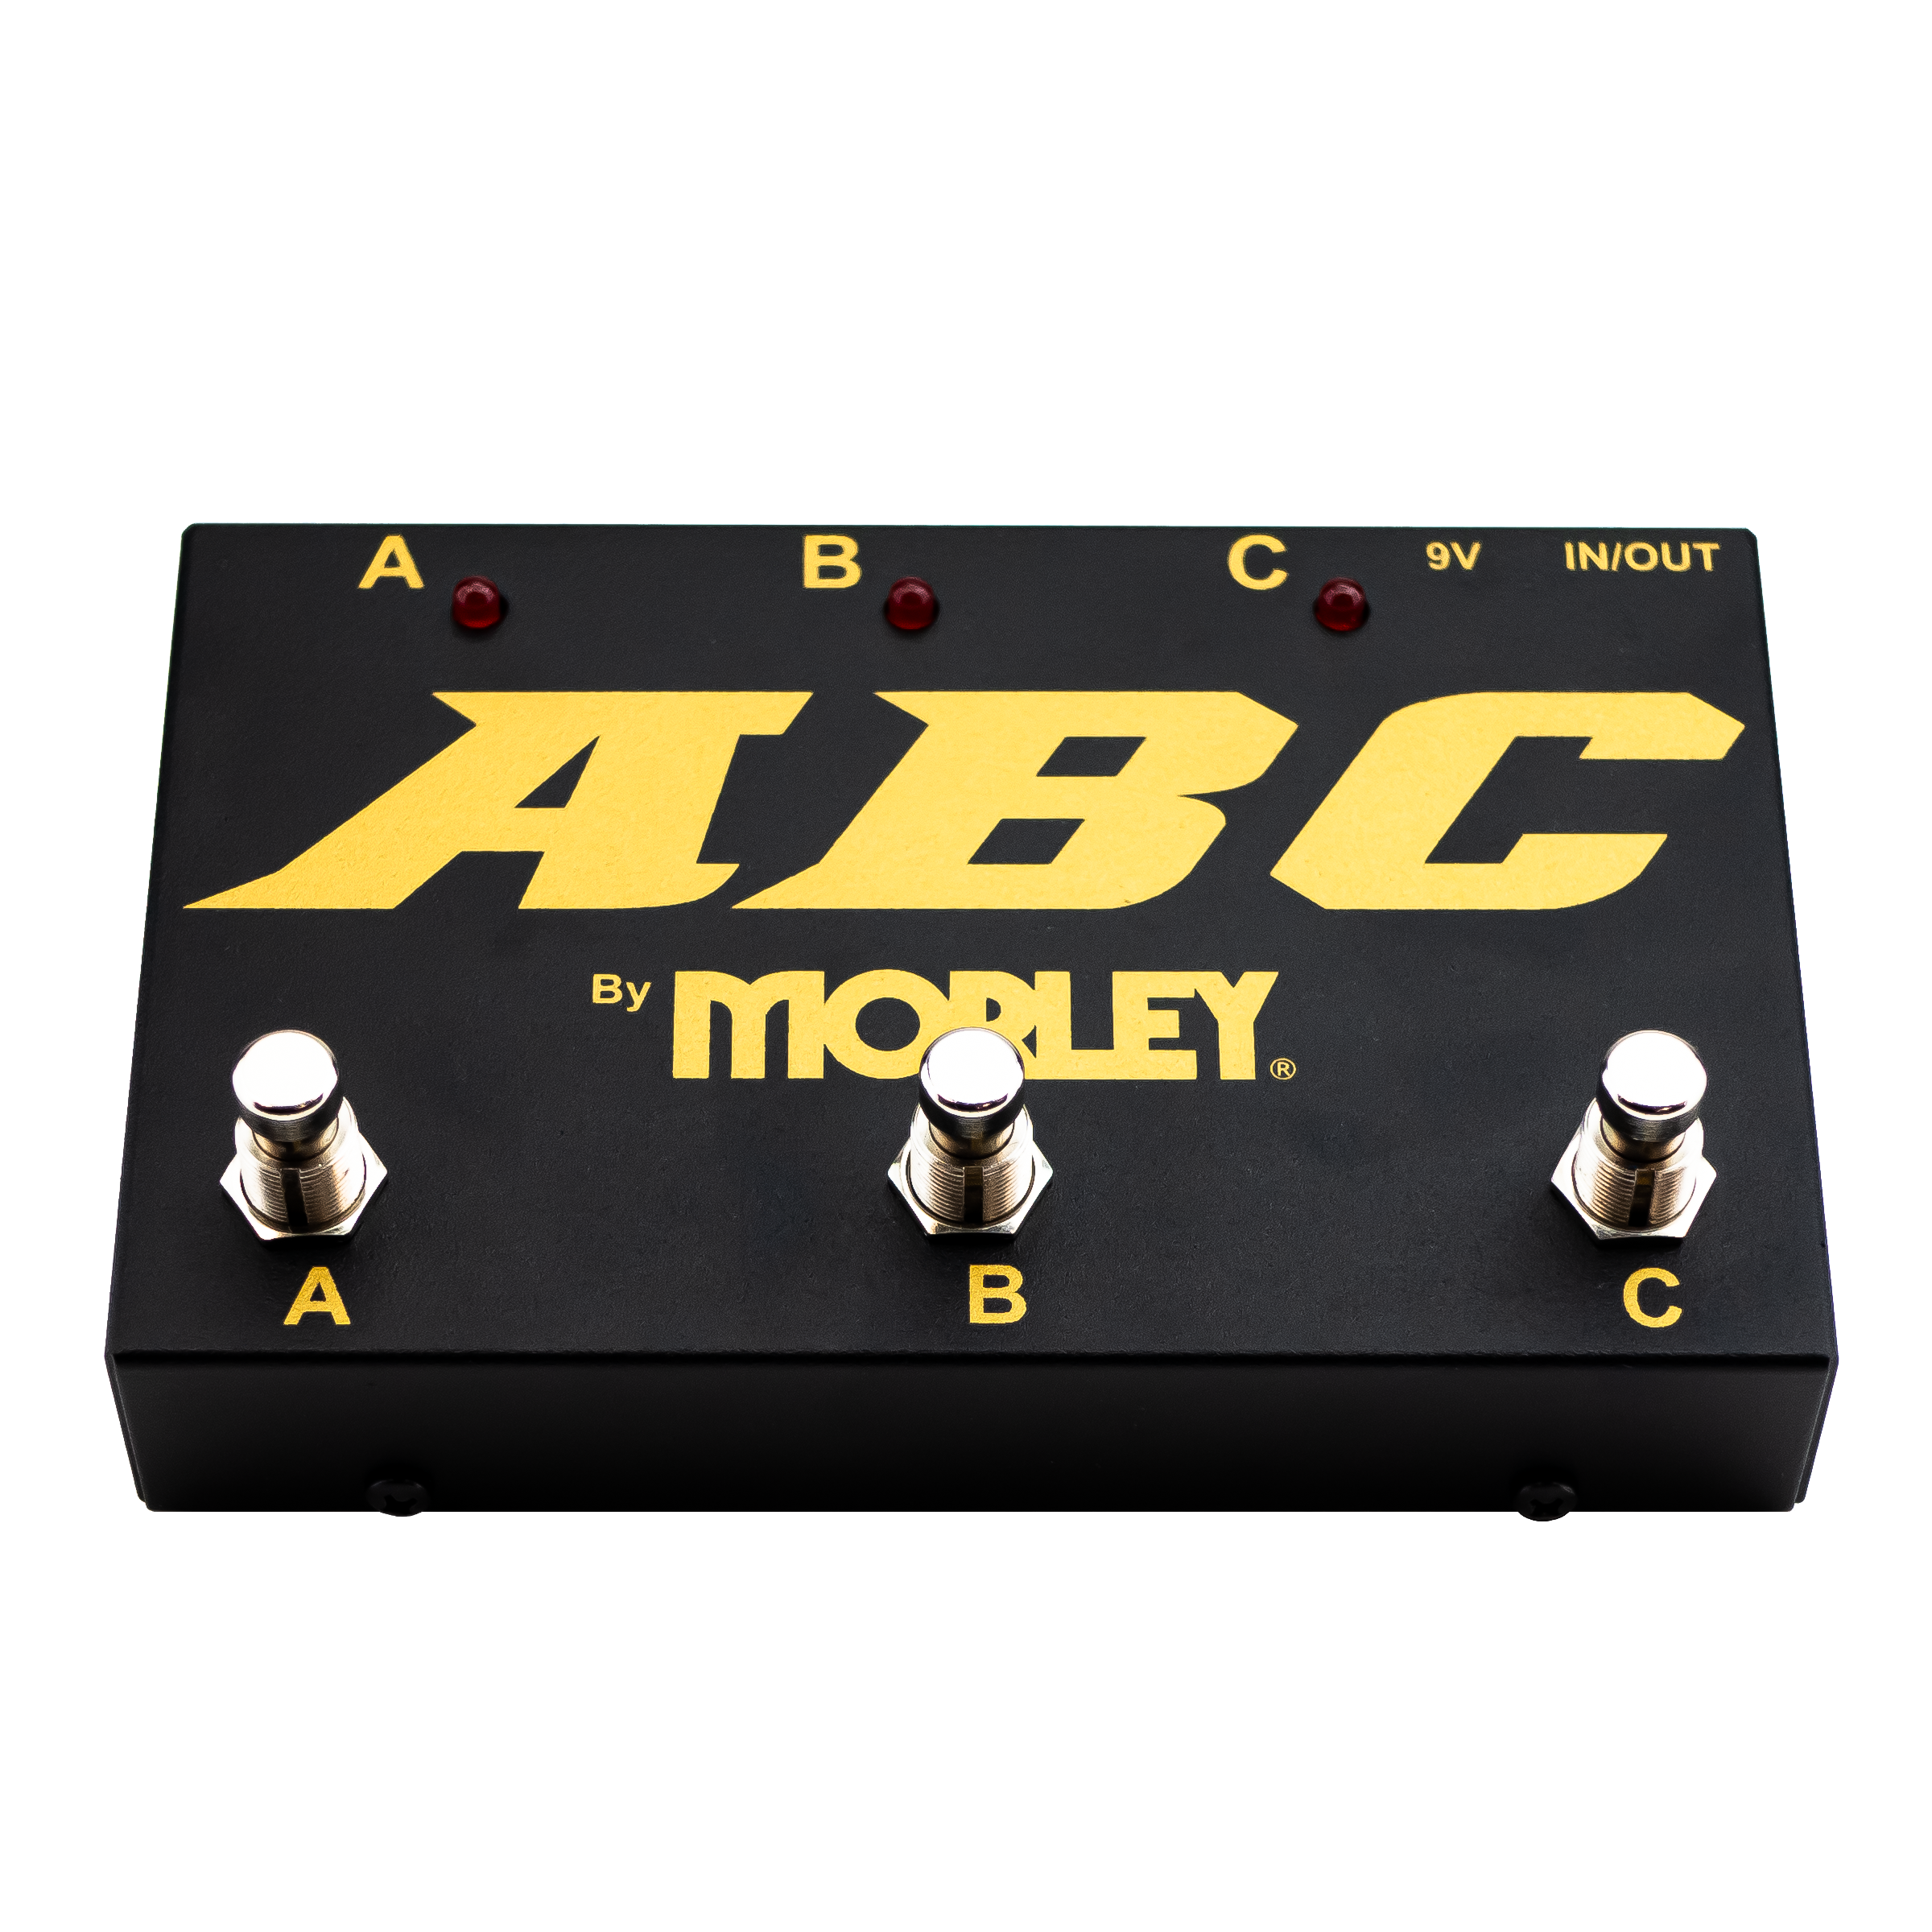 Morley Abc Gold Series Switcher 1 Vers 3 Ou 3 Vers 1 - Switch pedal - Variation 2